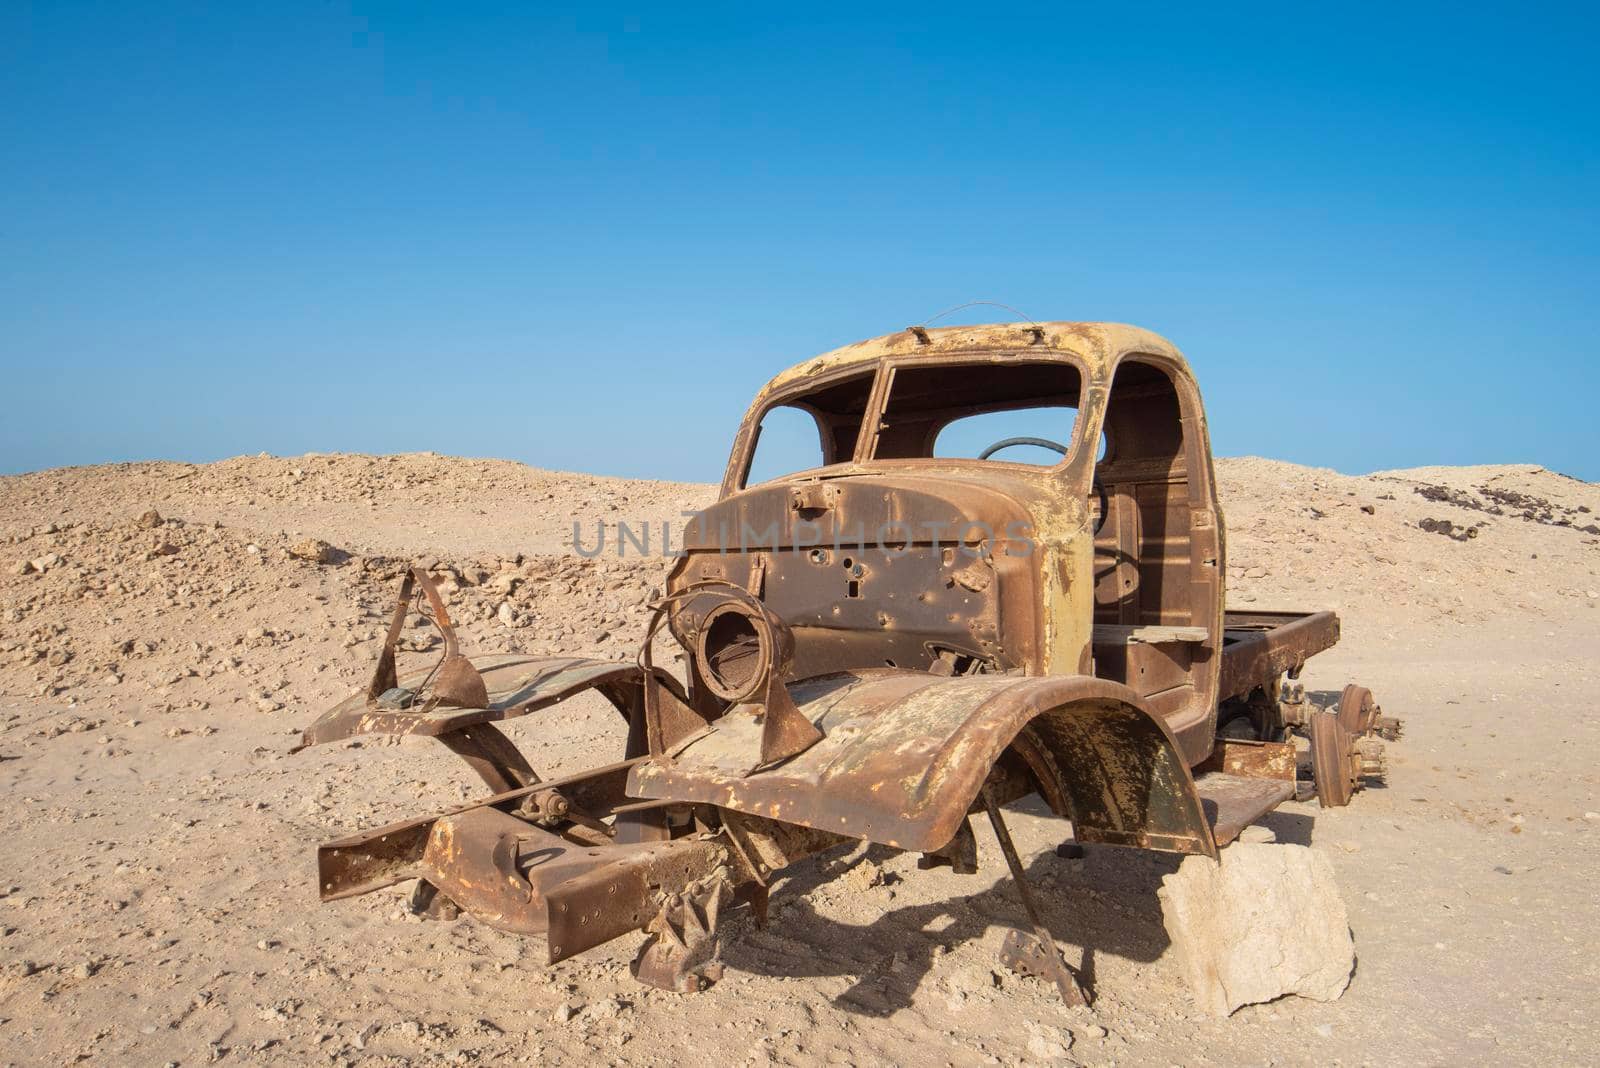 Remains of an old abandoned truck in the desert by paulvinten